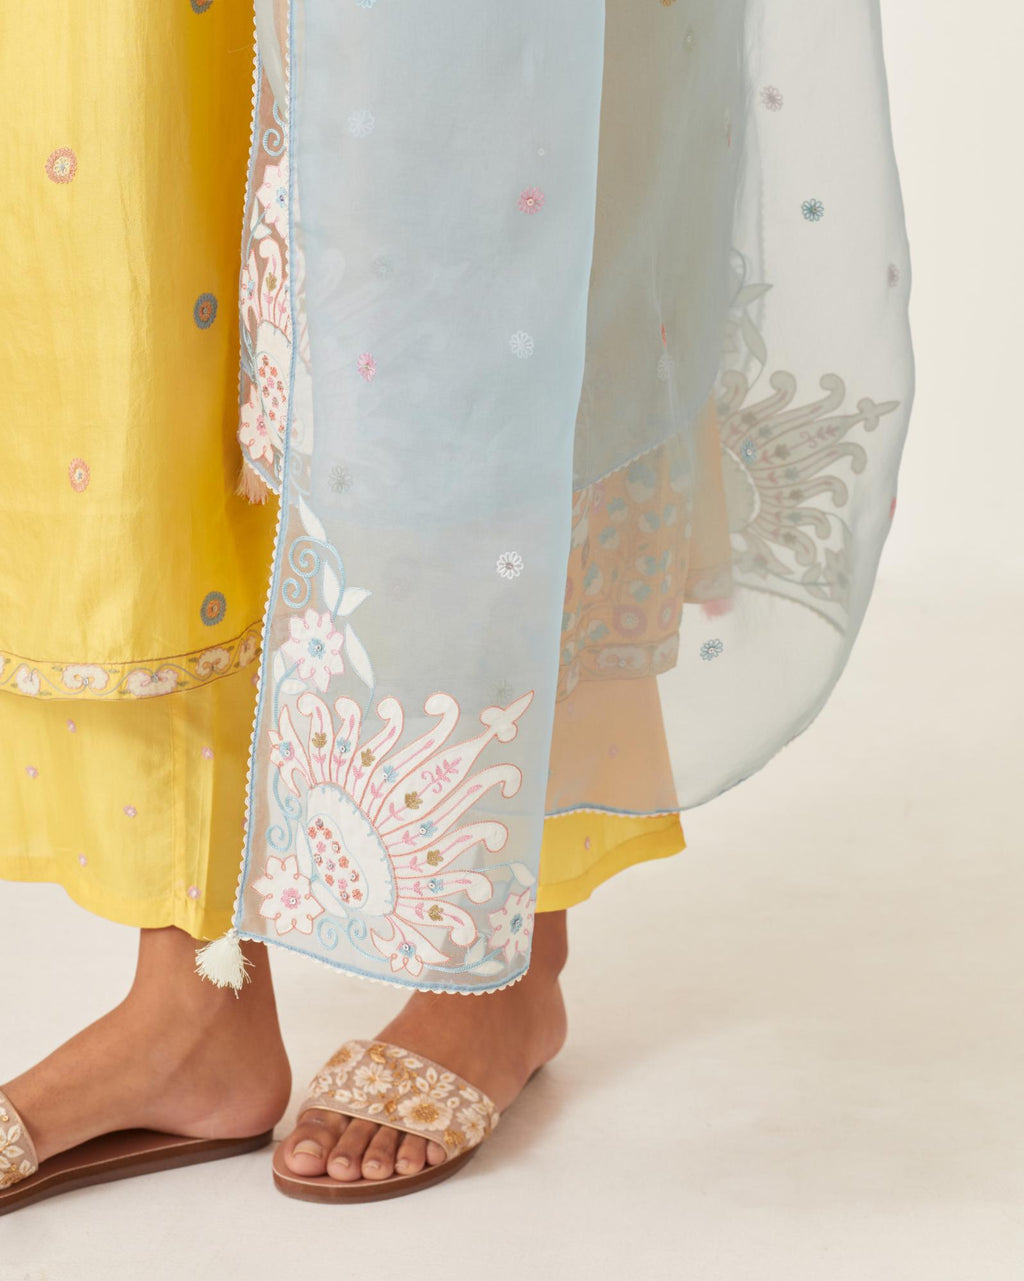 Yellow silk kurta dress set with appliqué stripes along with aari threadwork flowers and floral trellises along with a circular appliqued motif and fine gathers at empire line.